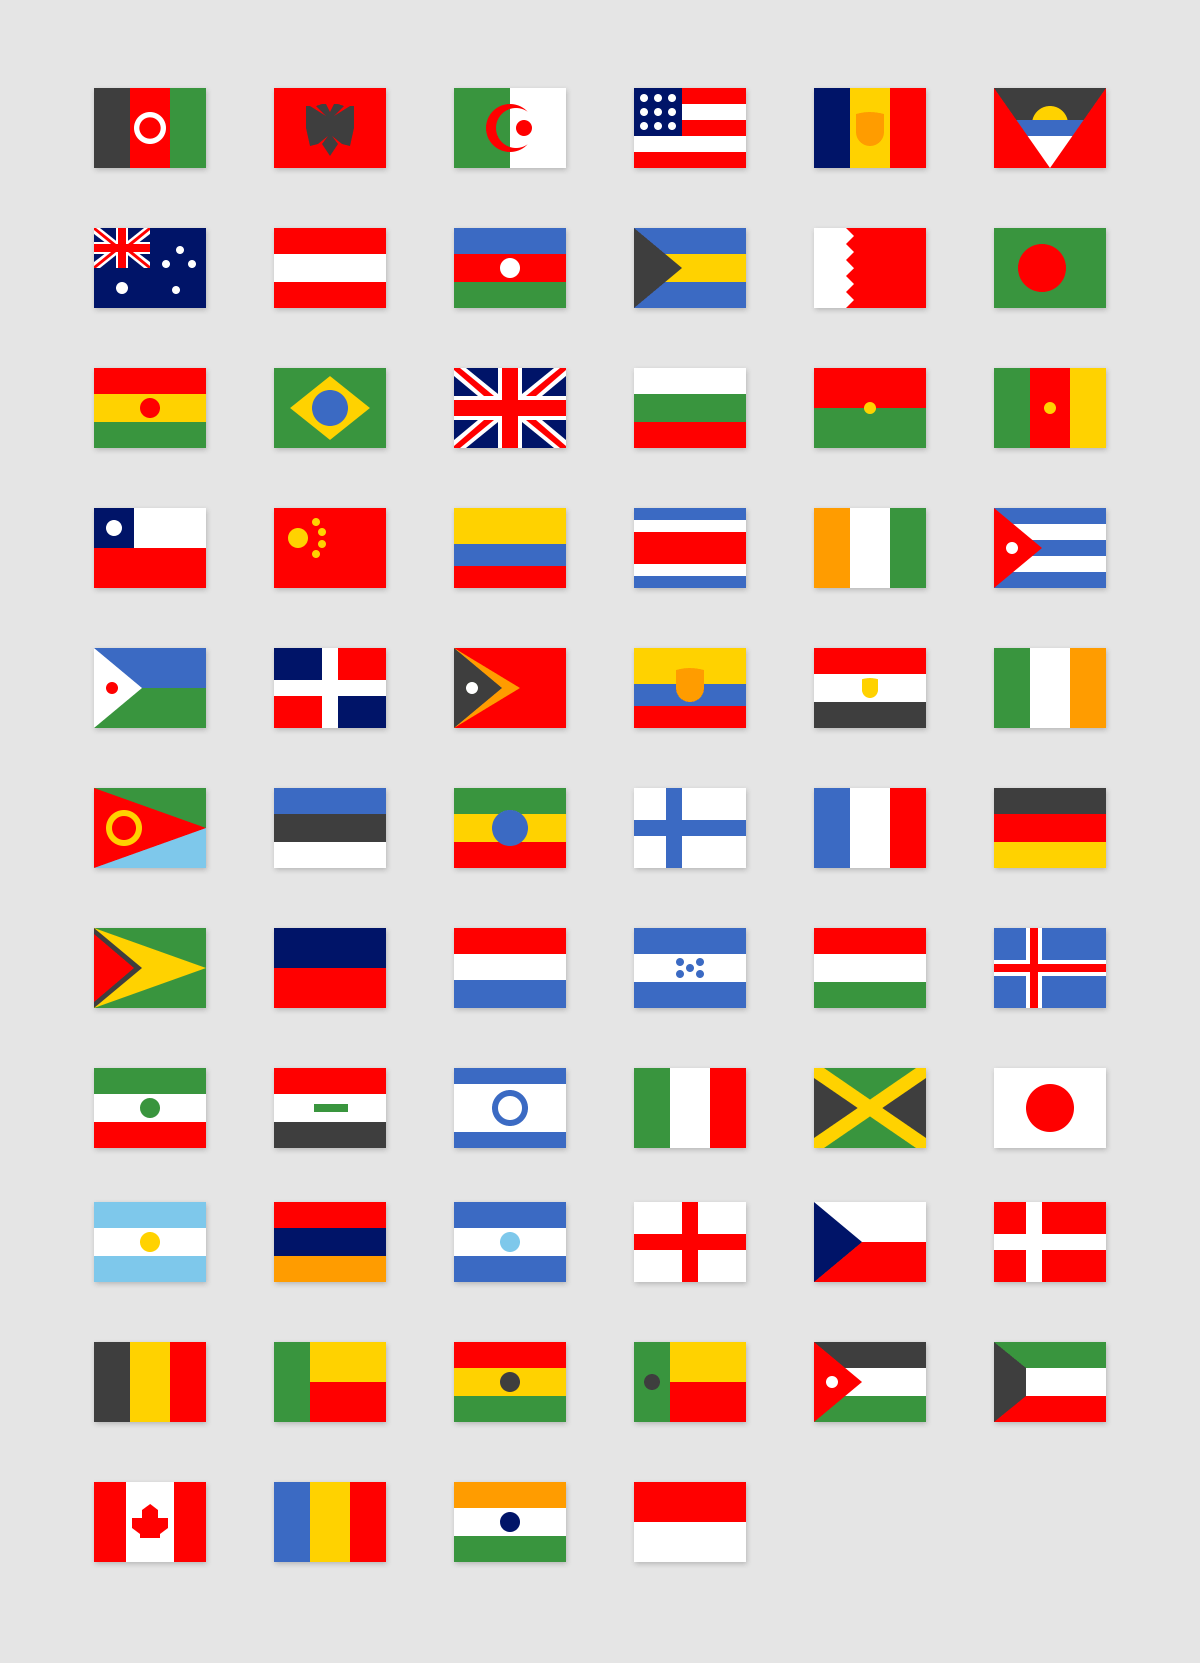 Flags of Russia in Post-Soviet flags style by Metallist-99 on DeviantArt